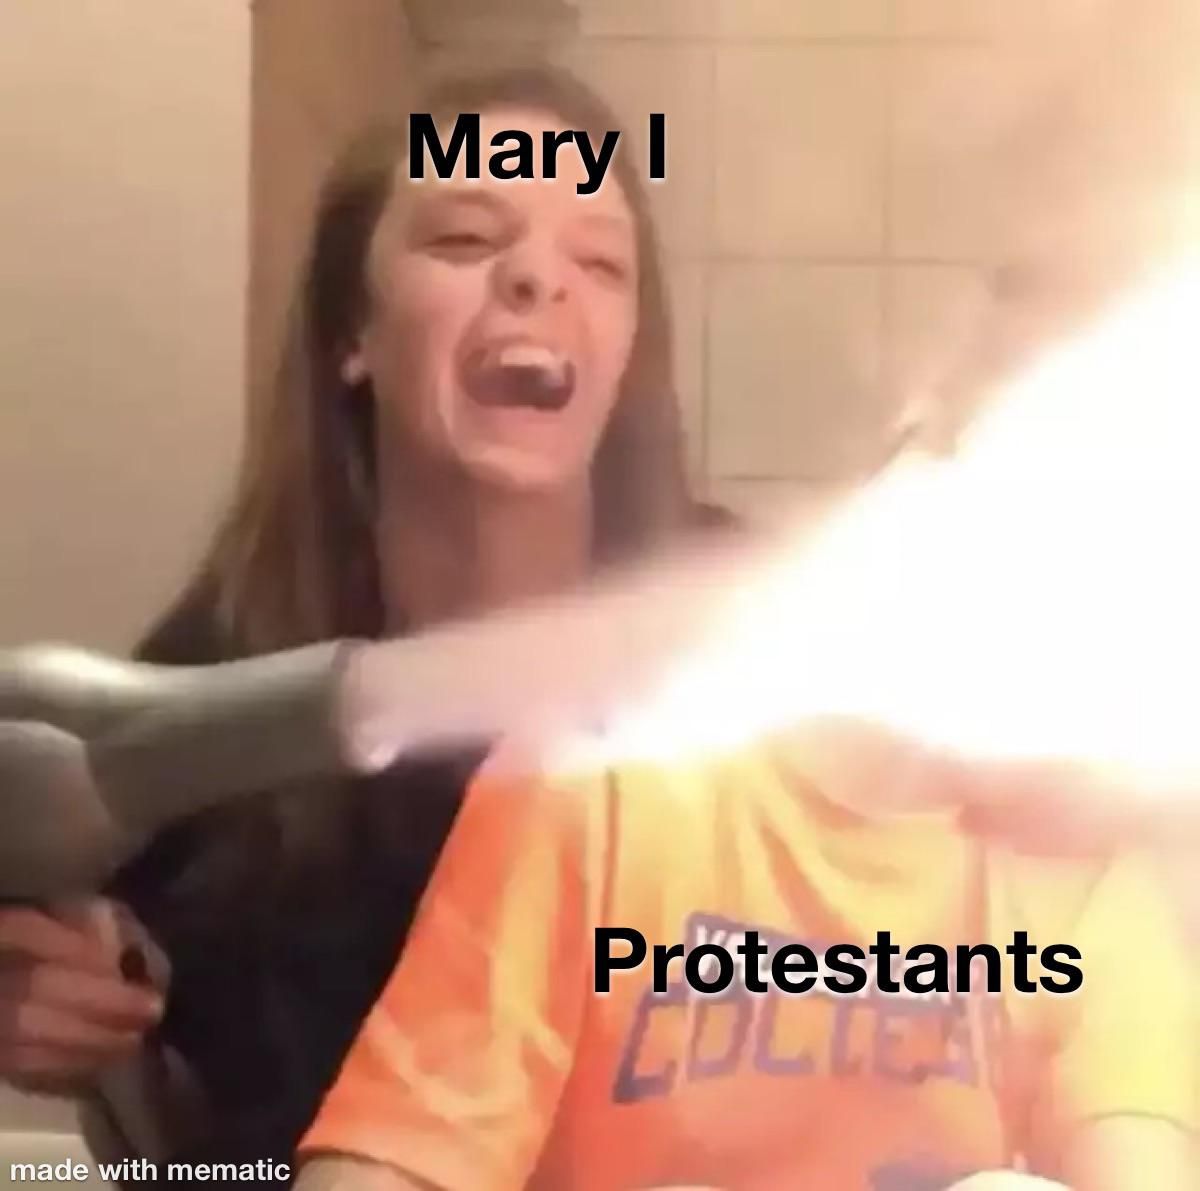 Mary I had over 280 Protestants burnt alive during her 3 year reign